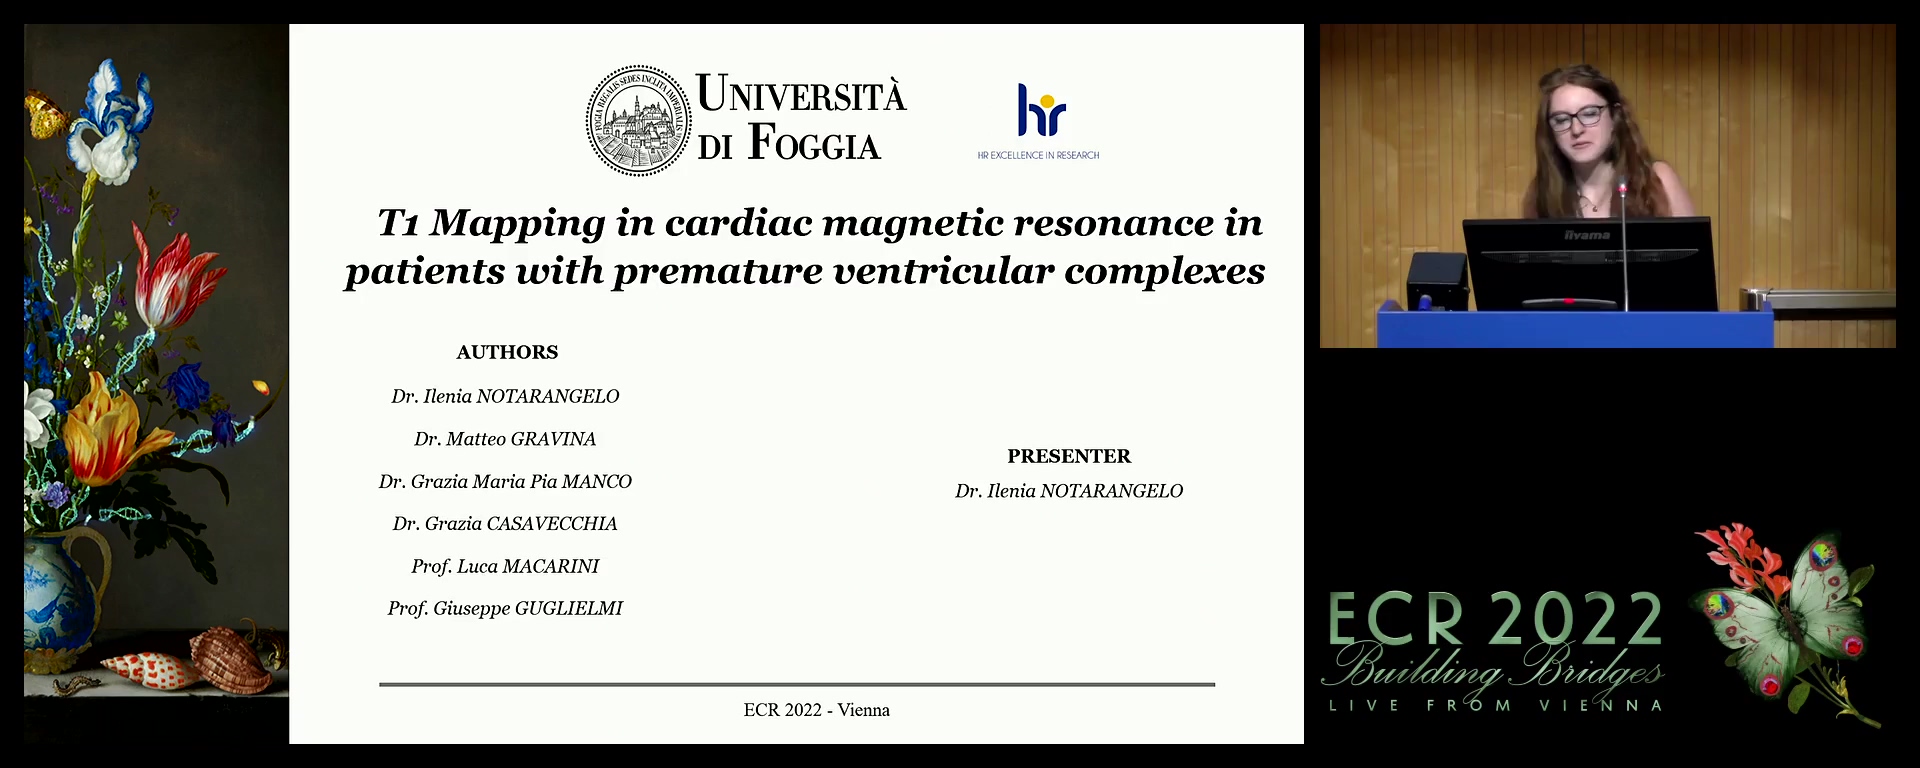 T1 Mapping in cardiac magnetic resonance in patients with premature ventricular complexes - Ilenia Notarangelo, Manfredonia / IT